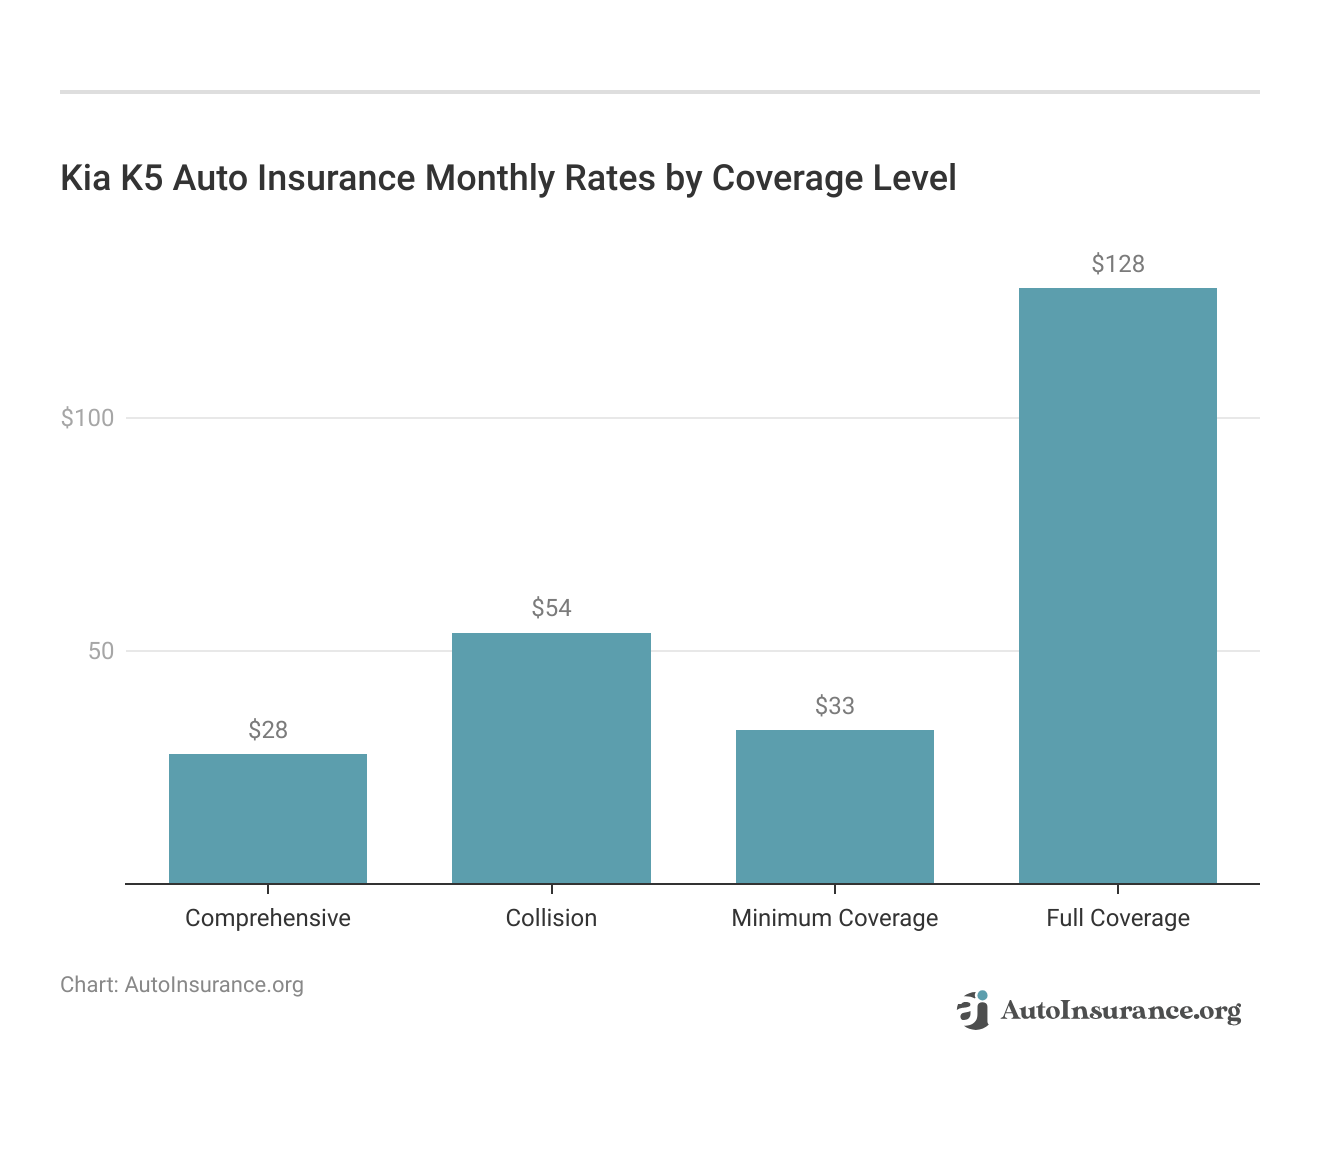 <h3>Kia K5 Auto Insurance Monthly Rates by Coverage Level</h3>